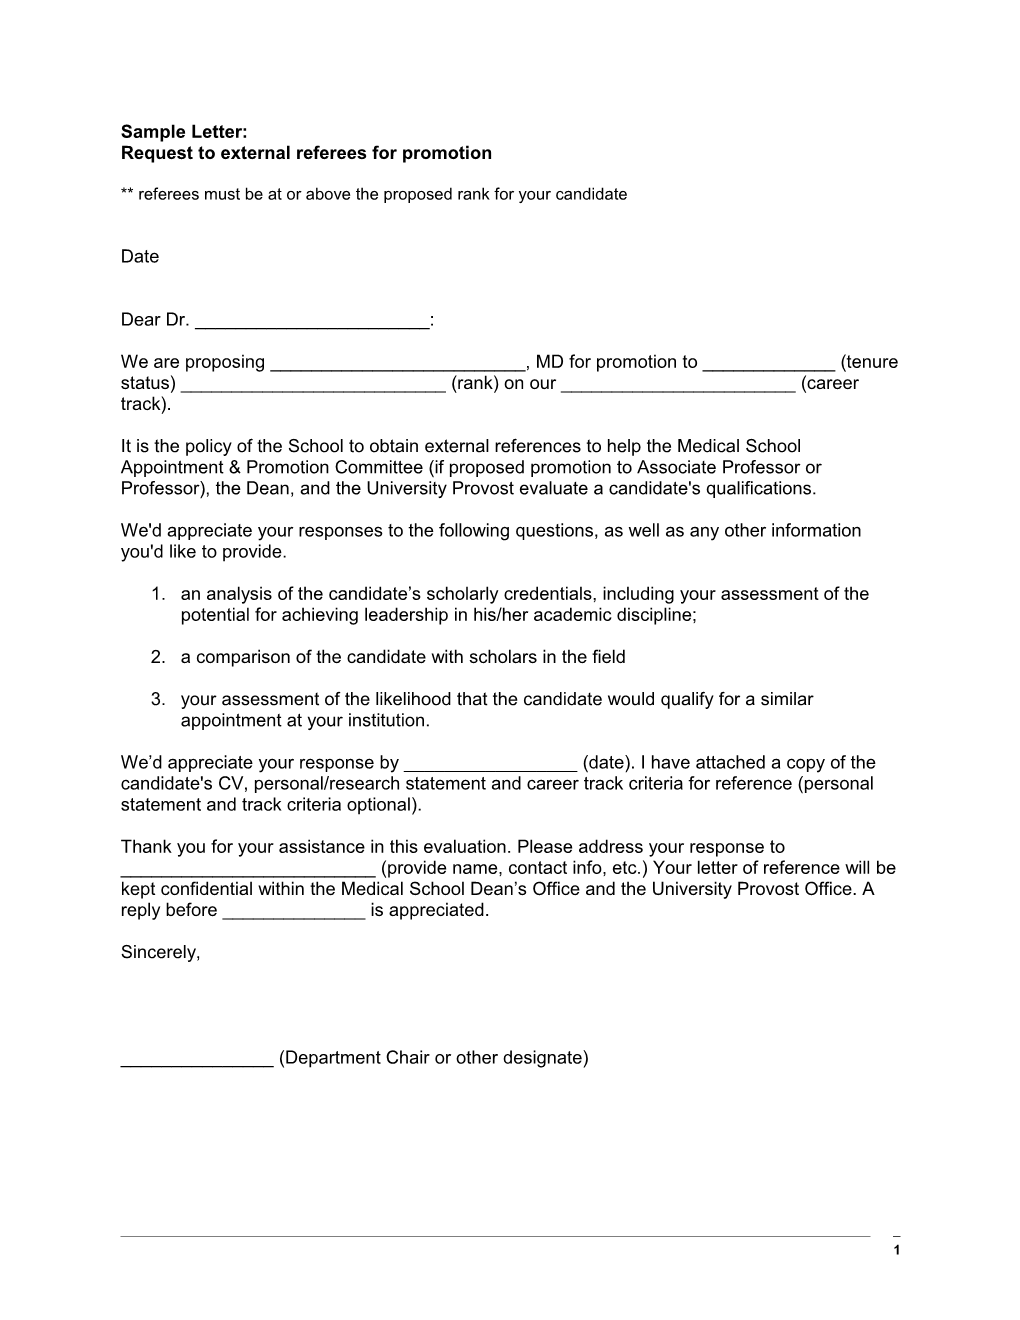 Sample Letter: Request to External Referees for Promotion